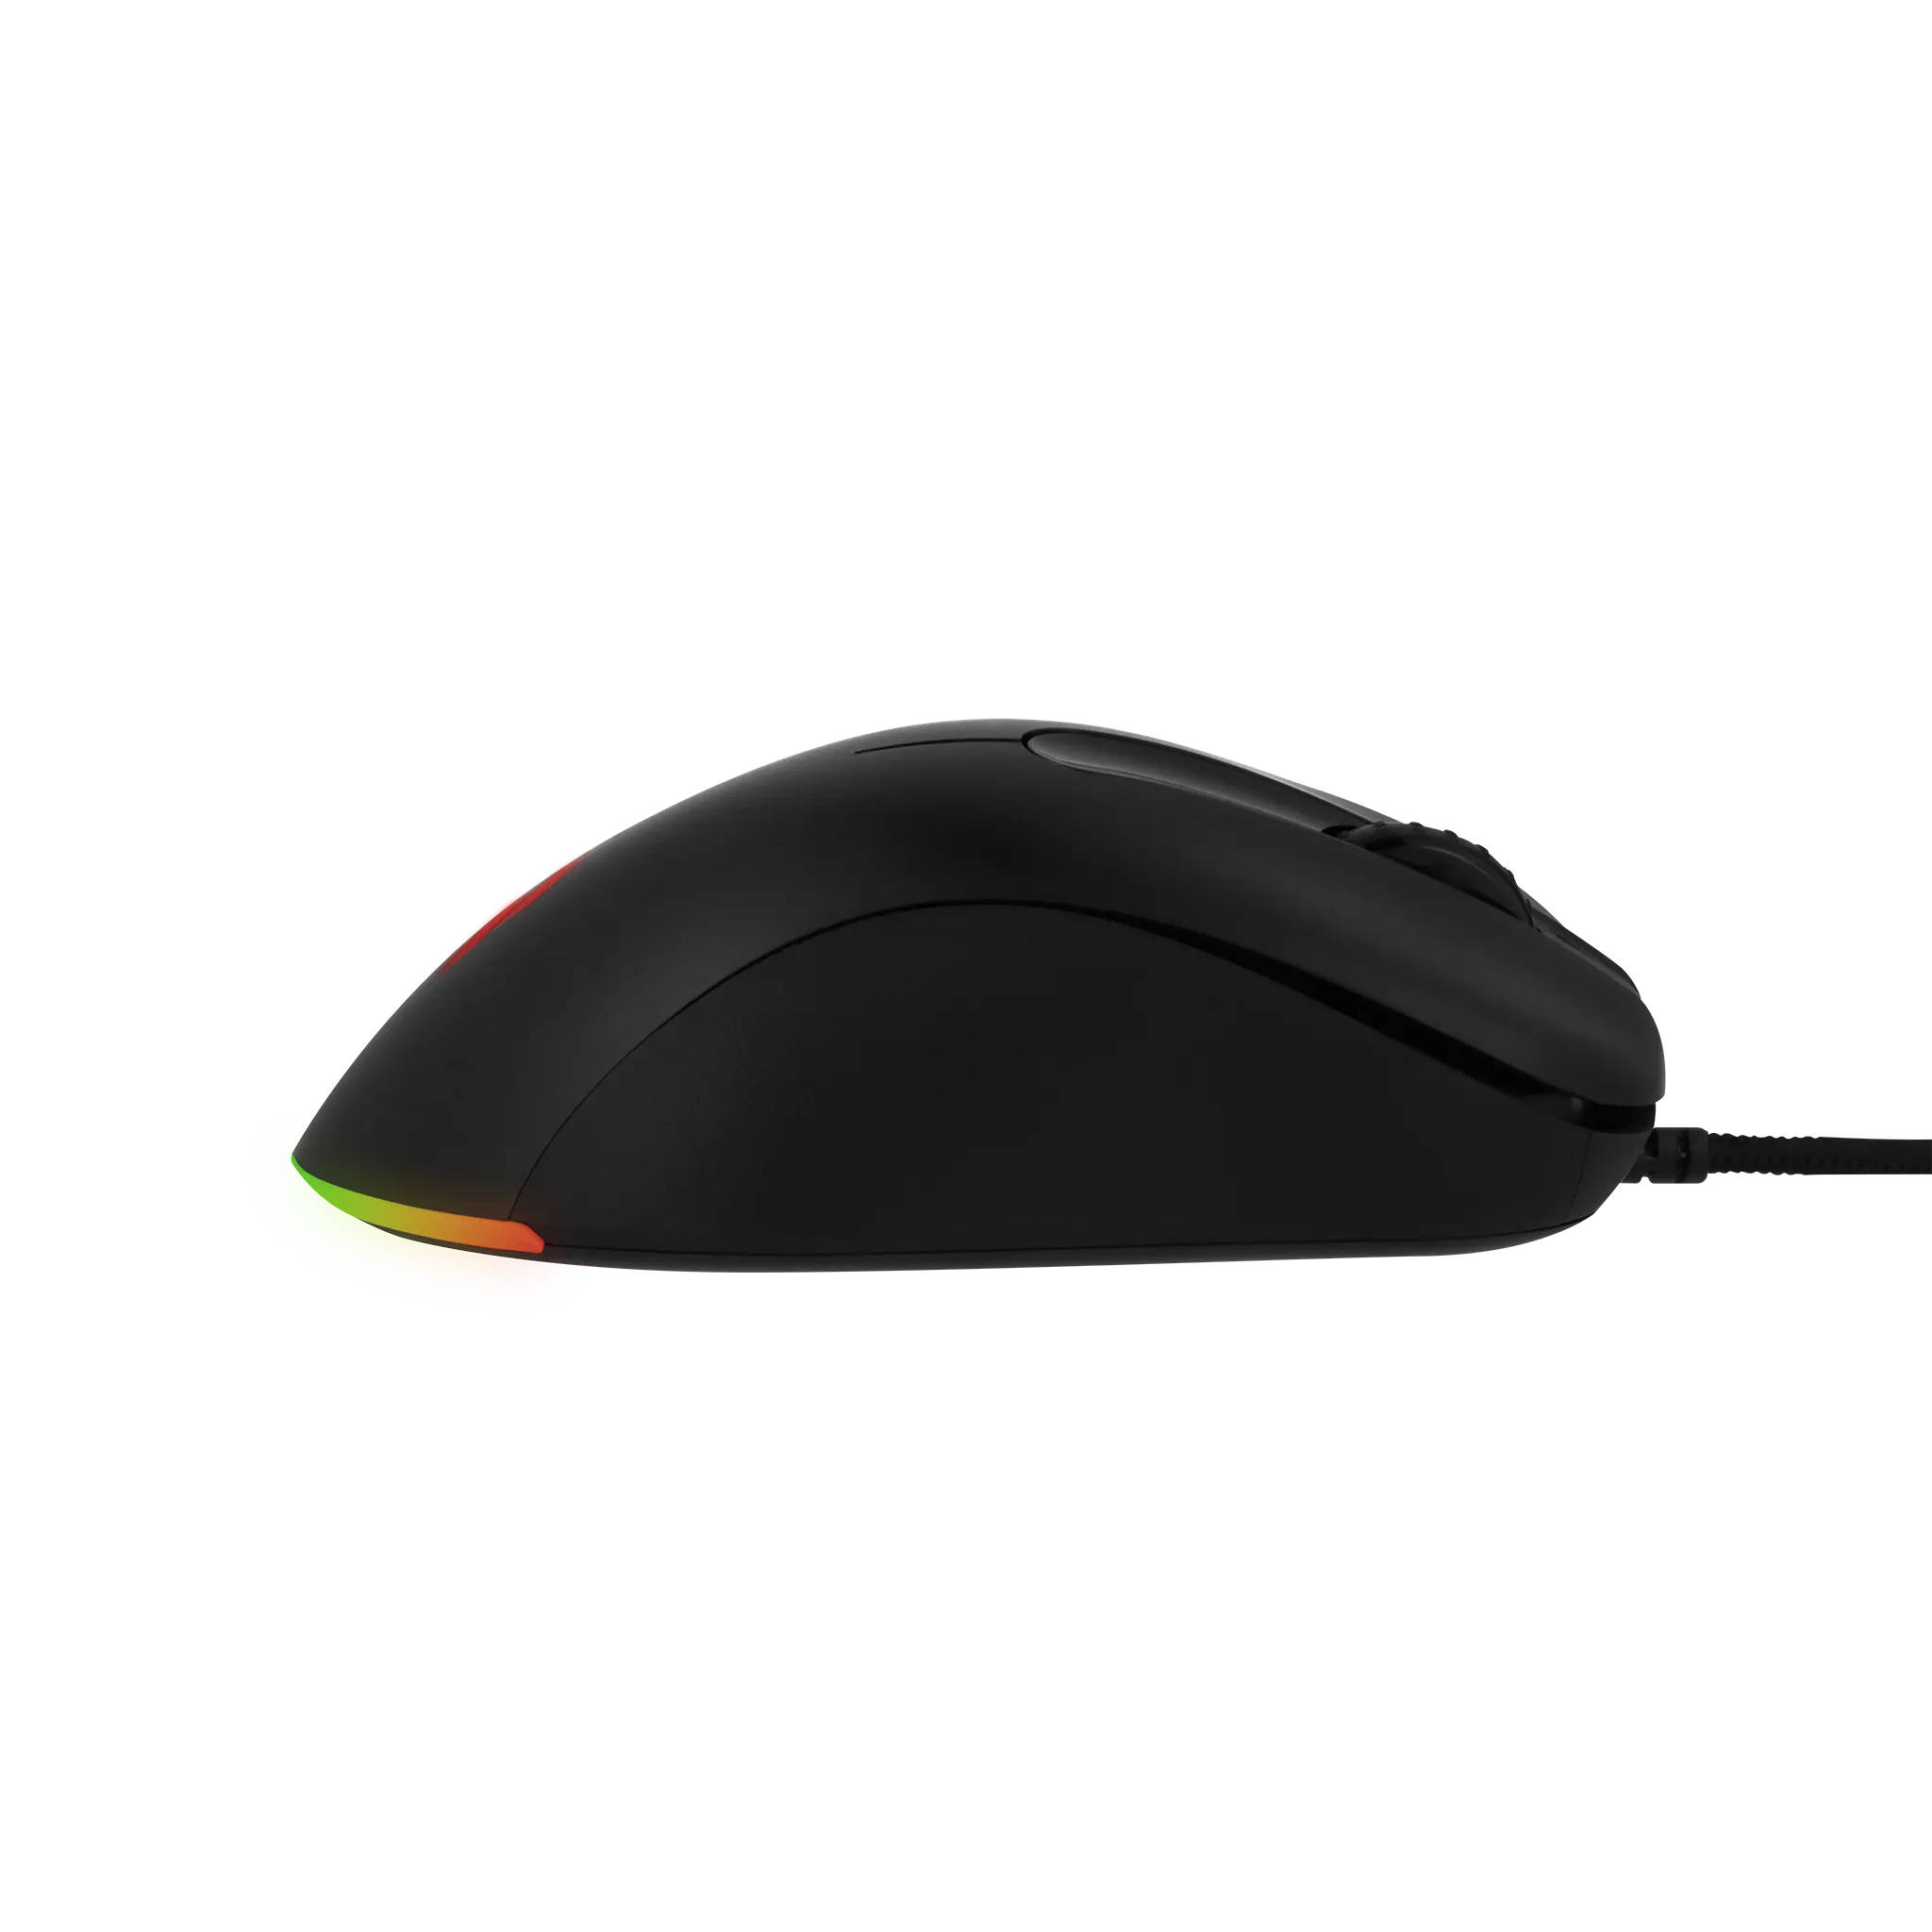 OCPC Gaming - MR44 Gaming Mouse